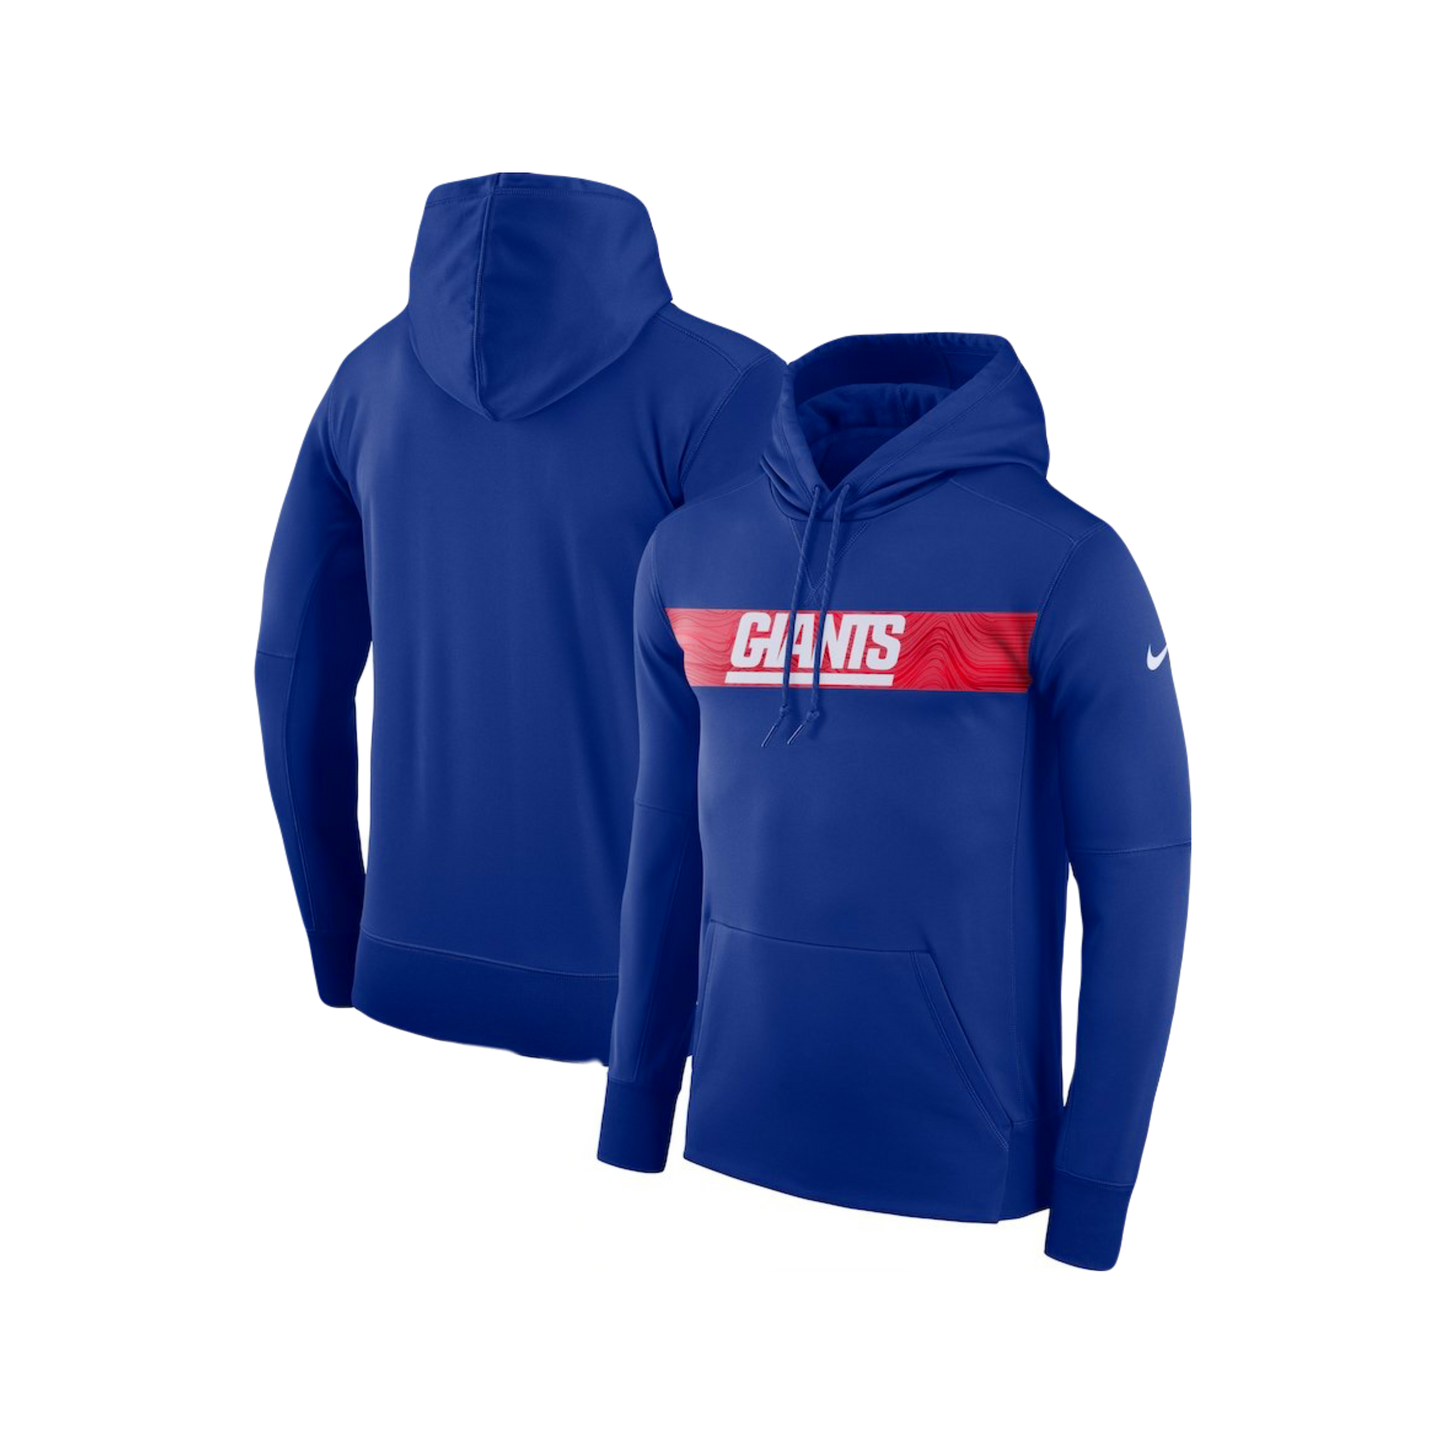 New York Giants ‘Statement’ NFL Nike Therma-Fit Athletic Performance Hoodie